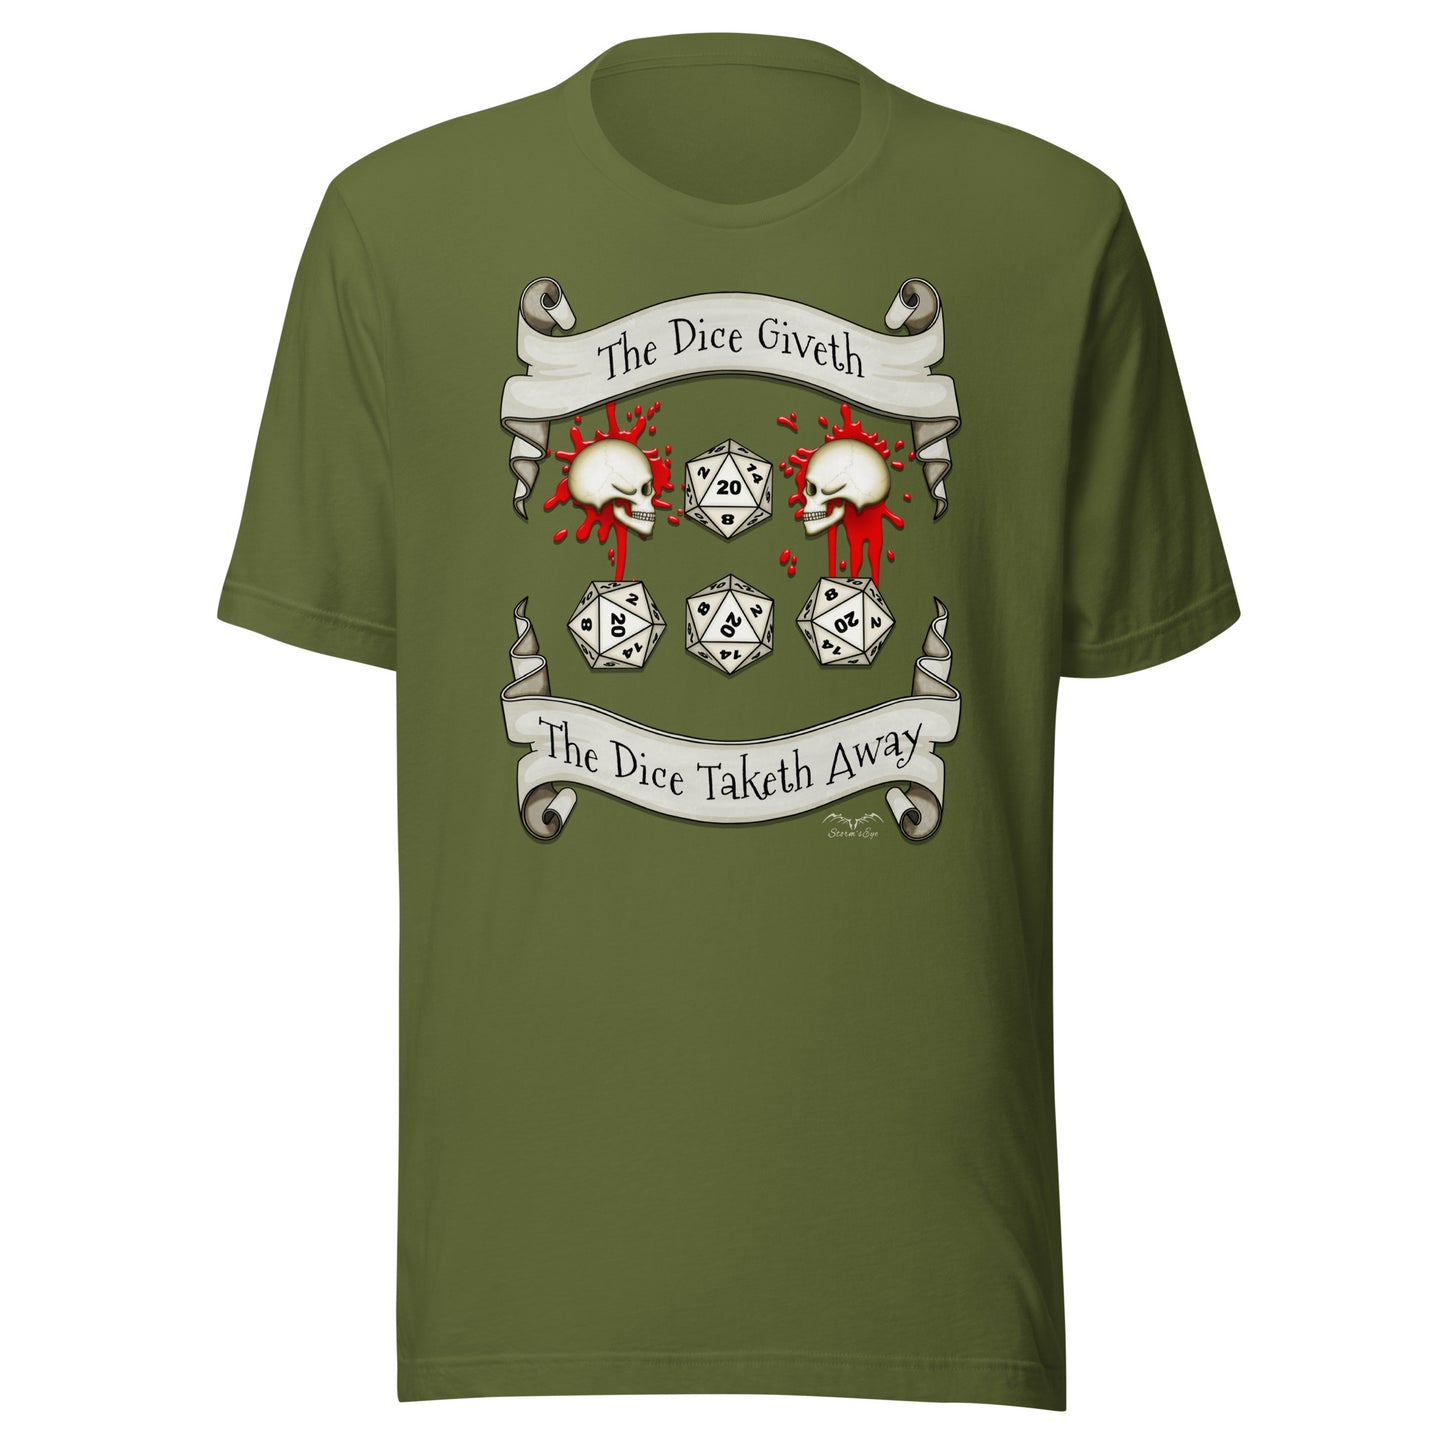 Dungeons and dragons D20 dice roll t-shirt olive green by stormseye design